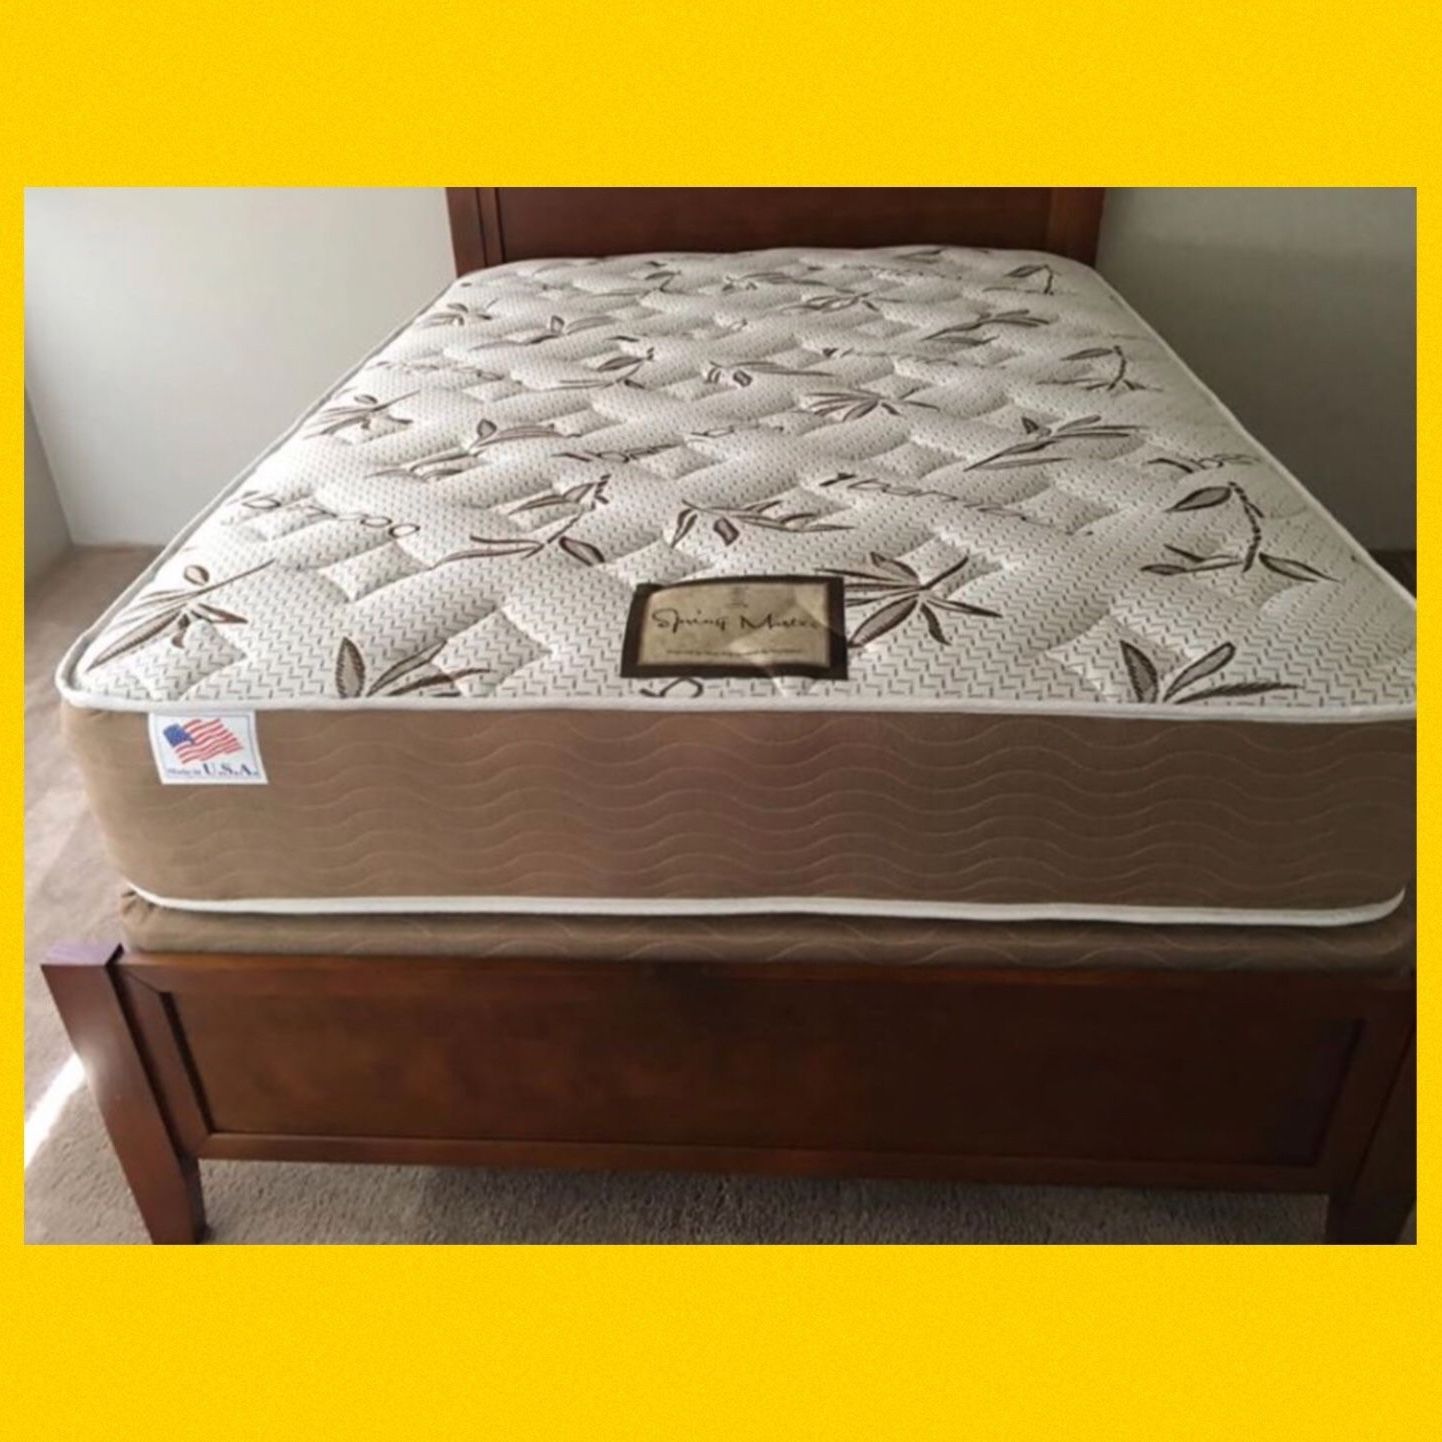 Double Sided Mattress and box spring Full Size for 299 (wooden bed frame sold separately)